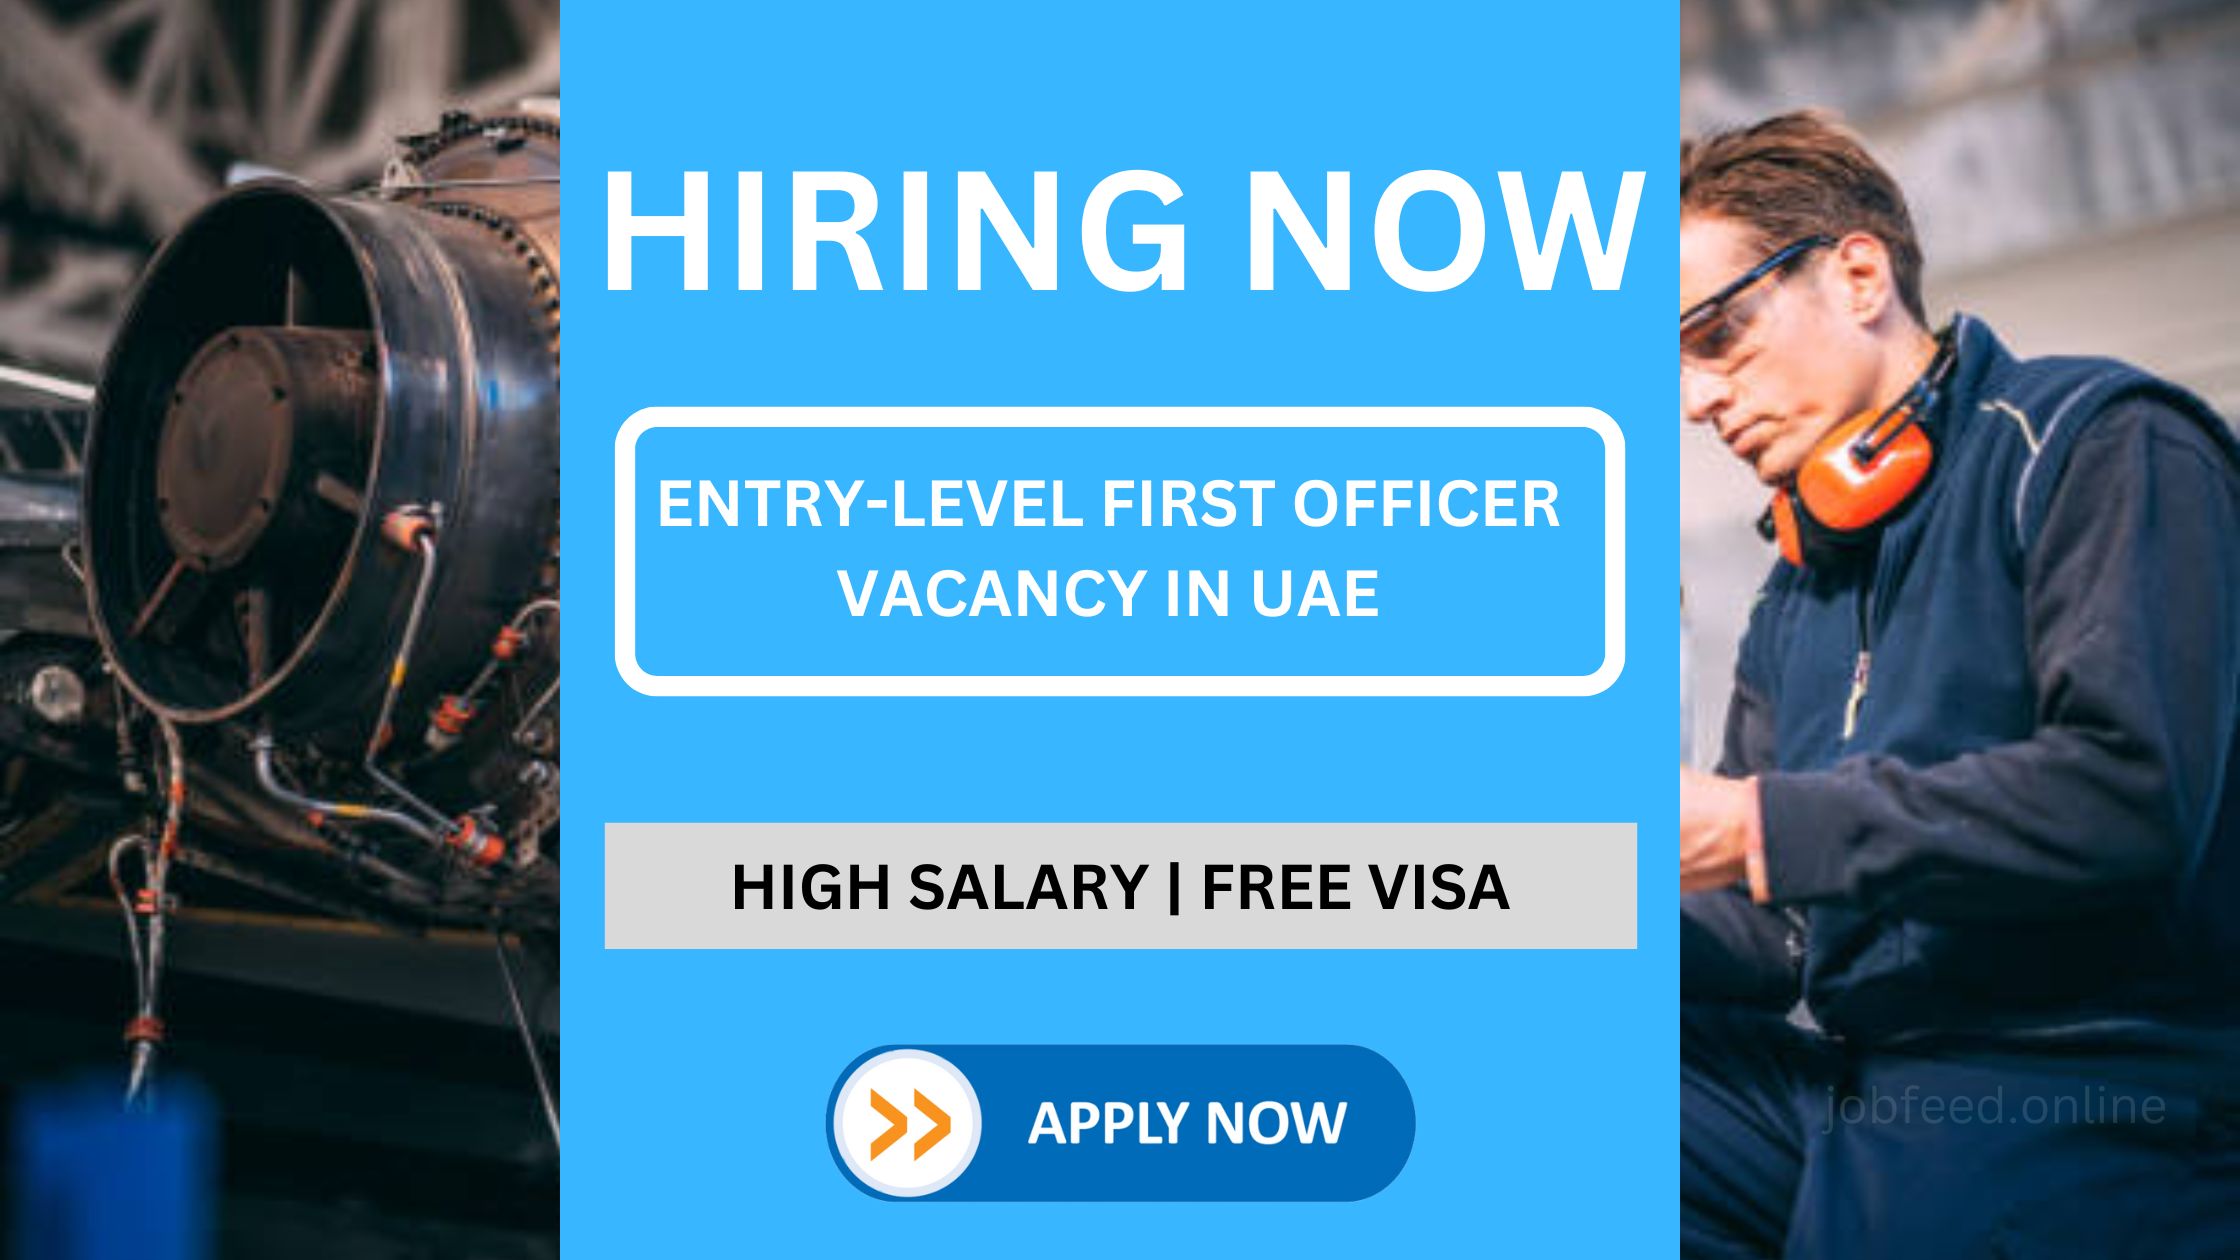 Entry-Level First Officer Vacancy In UAE